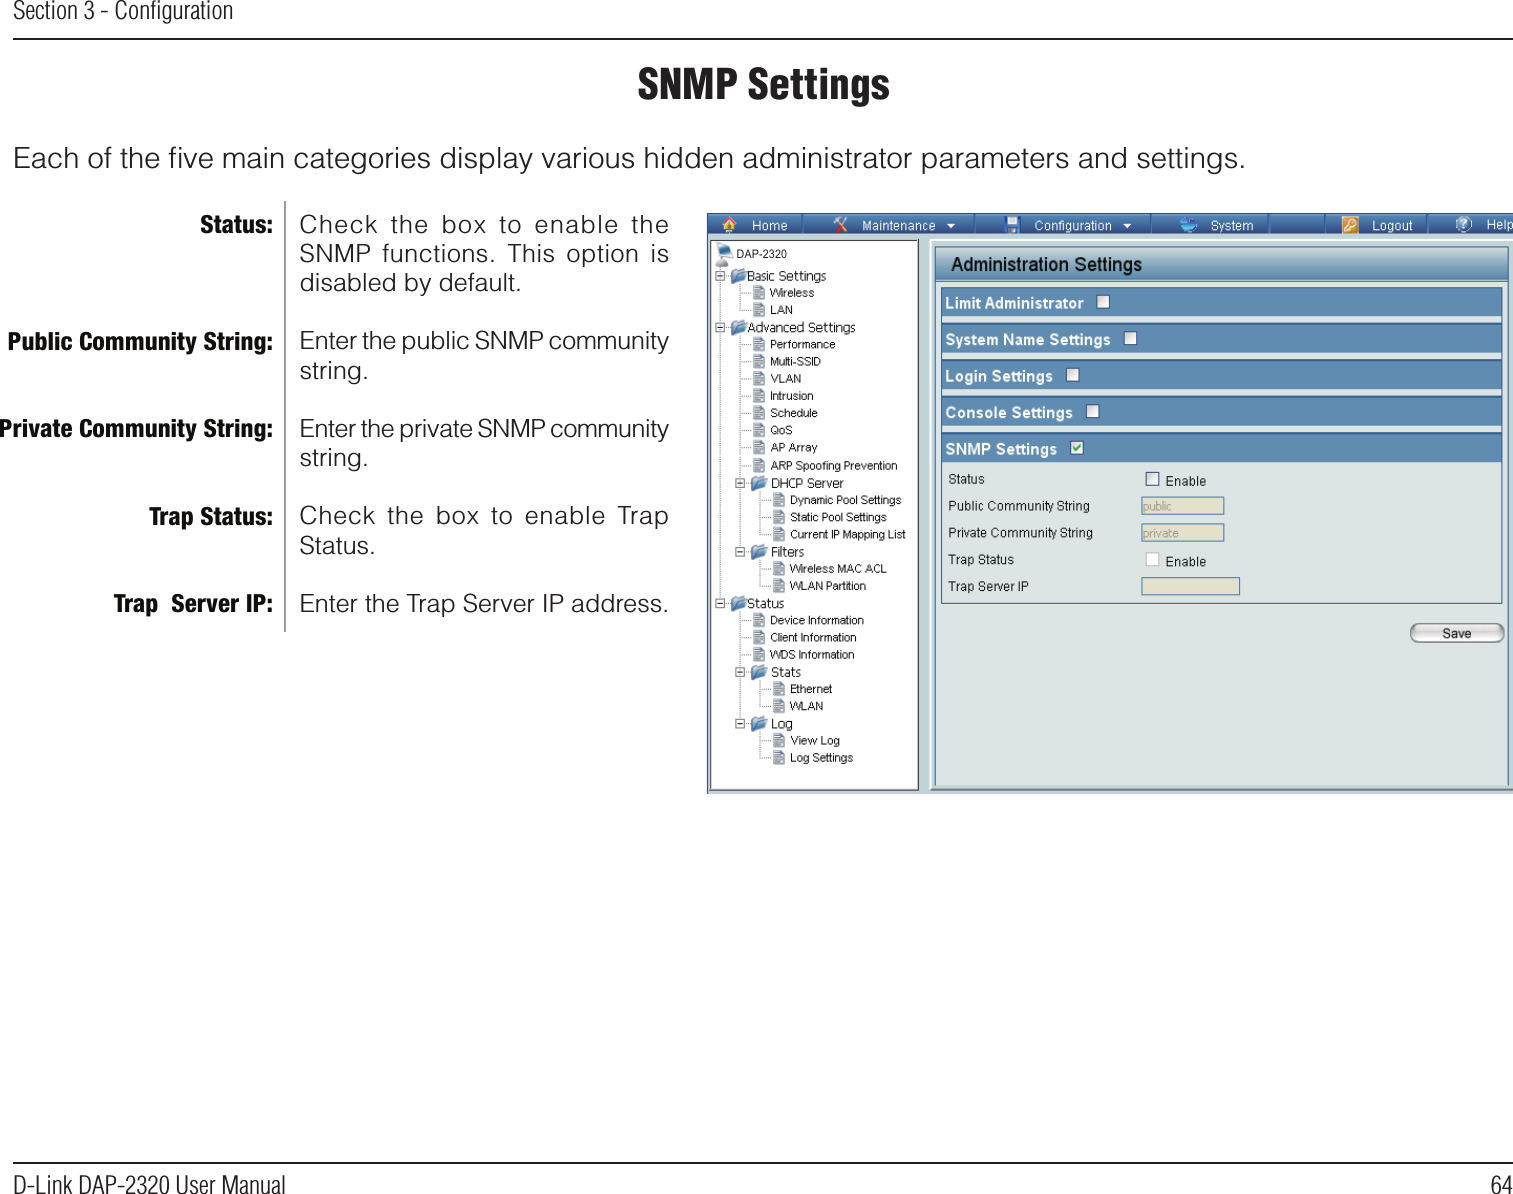 64D-Link DAP-2320 User ManualSection 3 - ConﬁgurationSNMP SettingsEach of the ﬁve main categories display various hidden administrator parameters and settings.Check  the  box  to  enable  the SNMP  functions.  This  option  is disabled by default.Enter the public SNMP community string.Enter the private SNMP community string.Check  the  box  to  enable  Trap Status.Enter the Trap Server IP address.Status:Public Community String:Private Community String:Trap Status:Trap  Server IP:DAP-2320